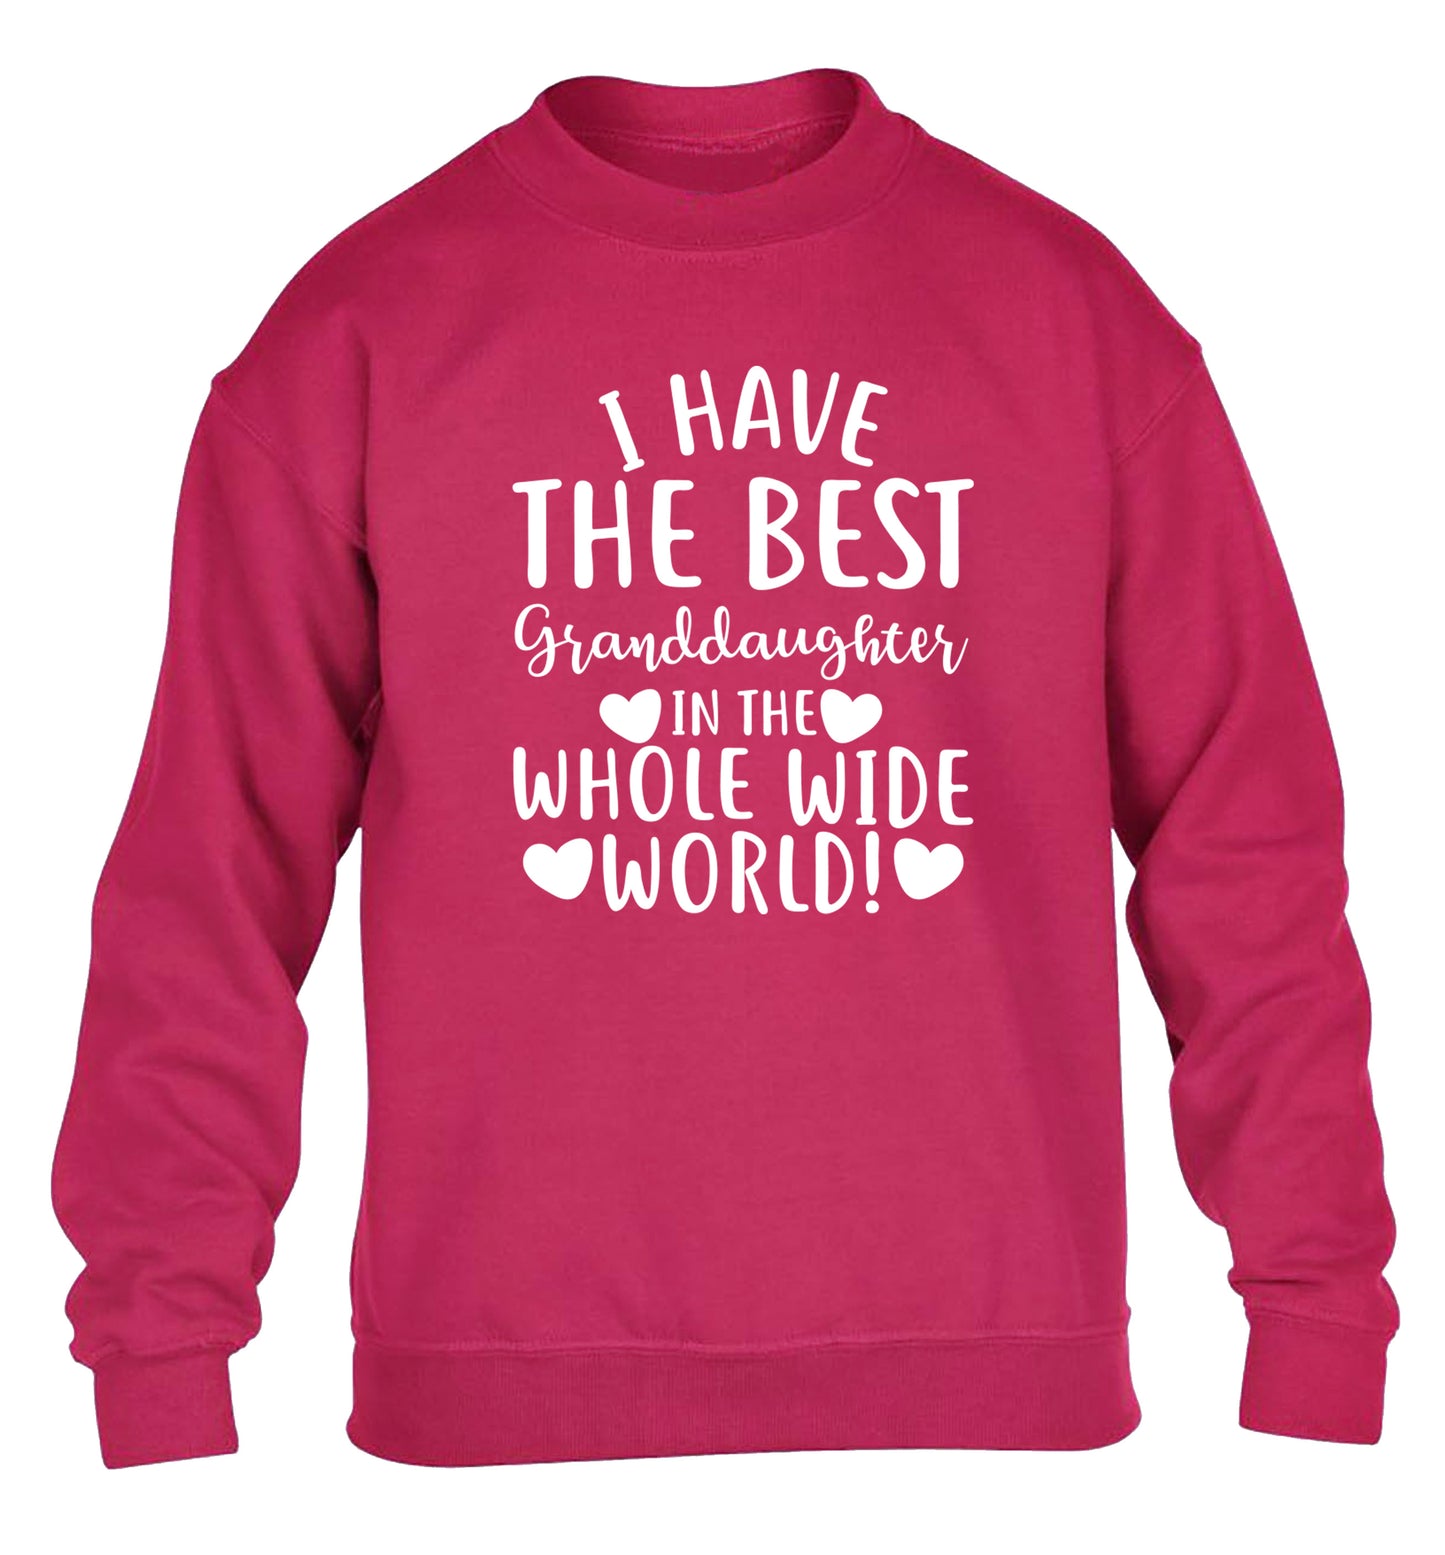 I have the best granddaughter in the whole wide world! children's pink sweater 12-13 Years